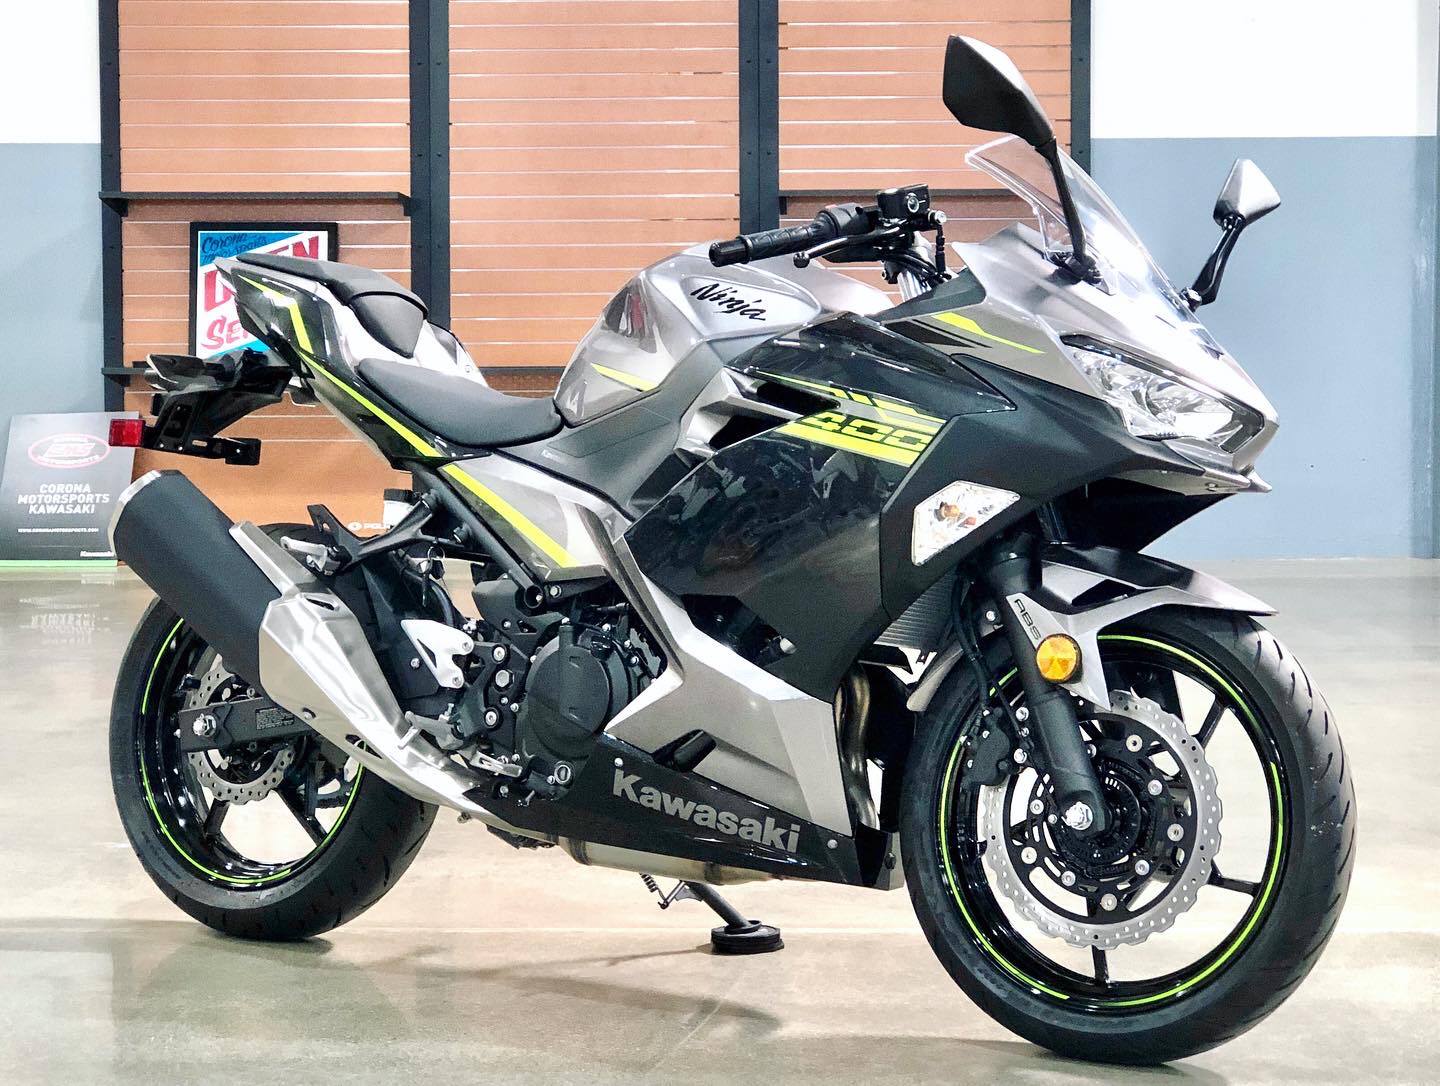 Kawasaki Ninja 400 Insurance Cost : What Are Your Opinions On The ...